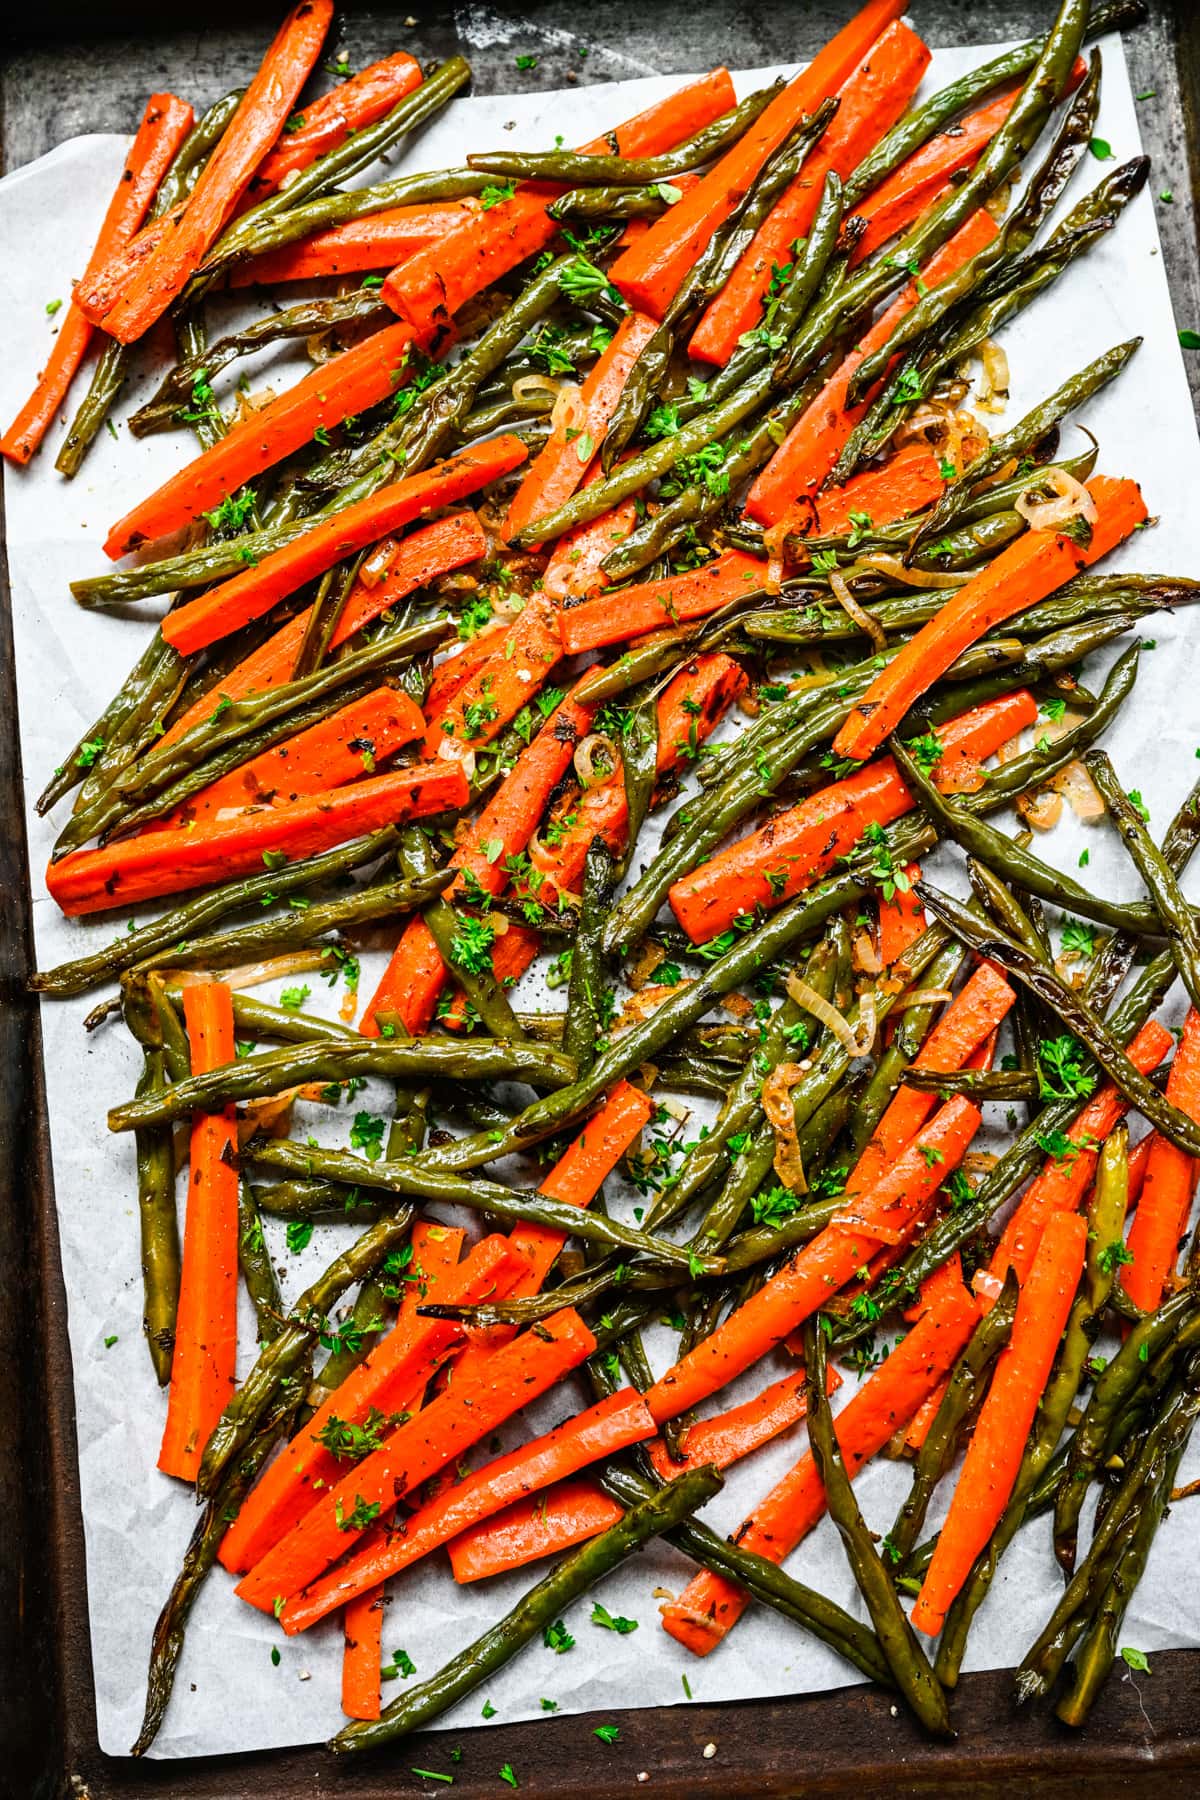 Finished roasted green beans and carrots on a sheet pan.